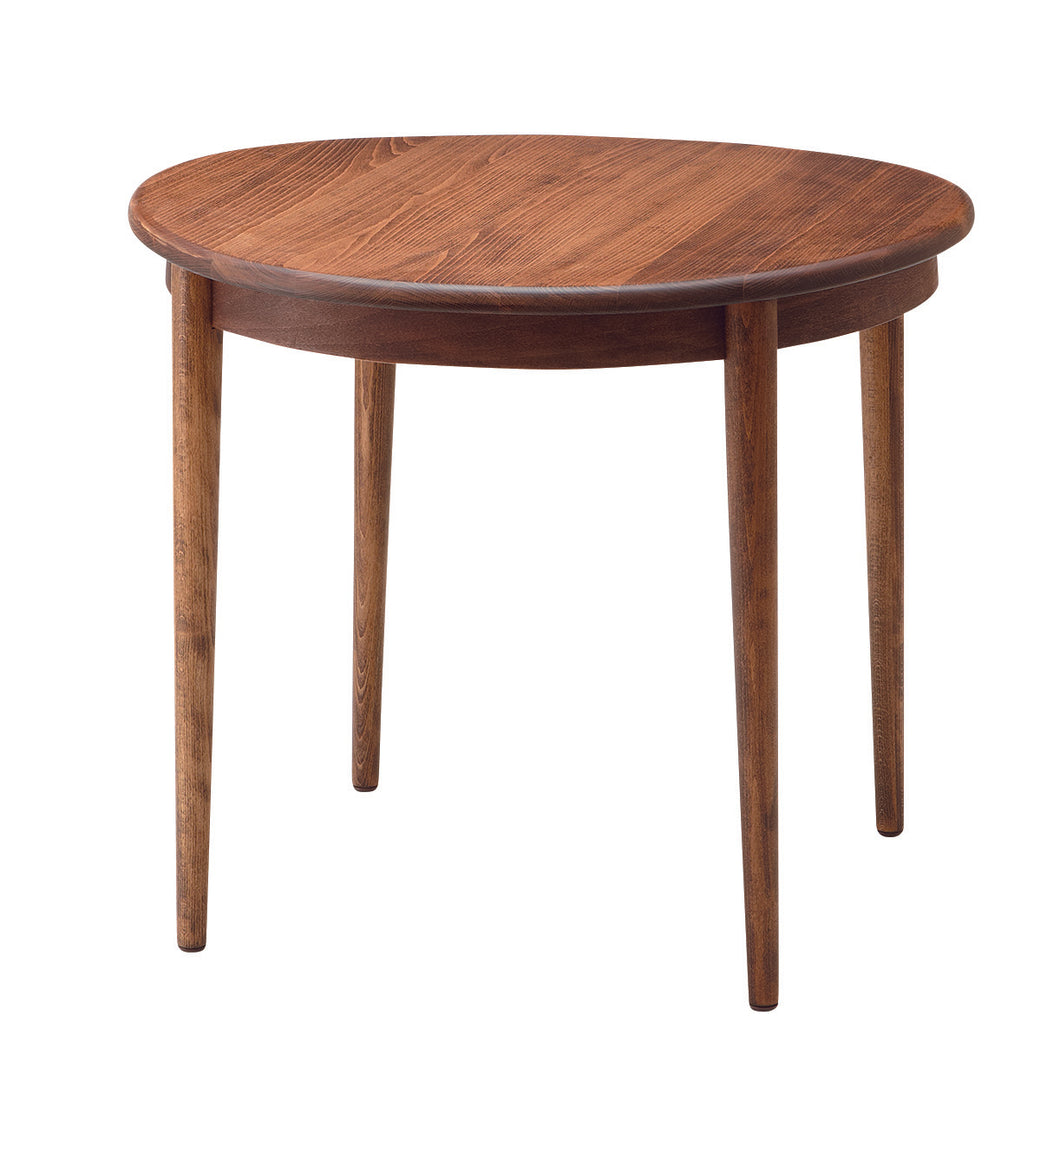 Carl Dining Round 84 Table